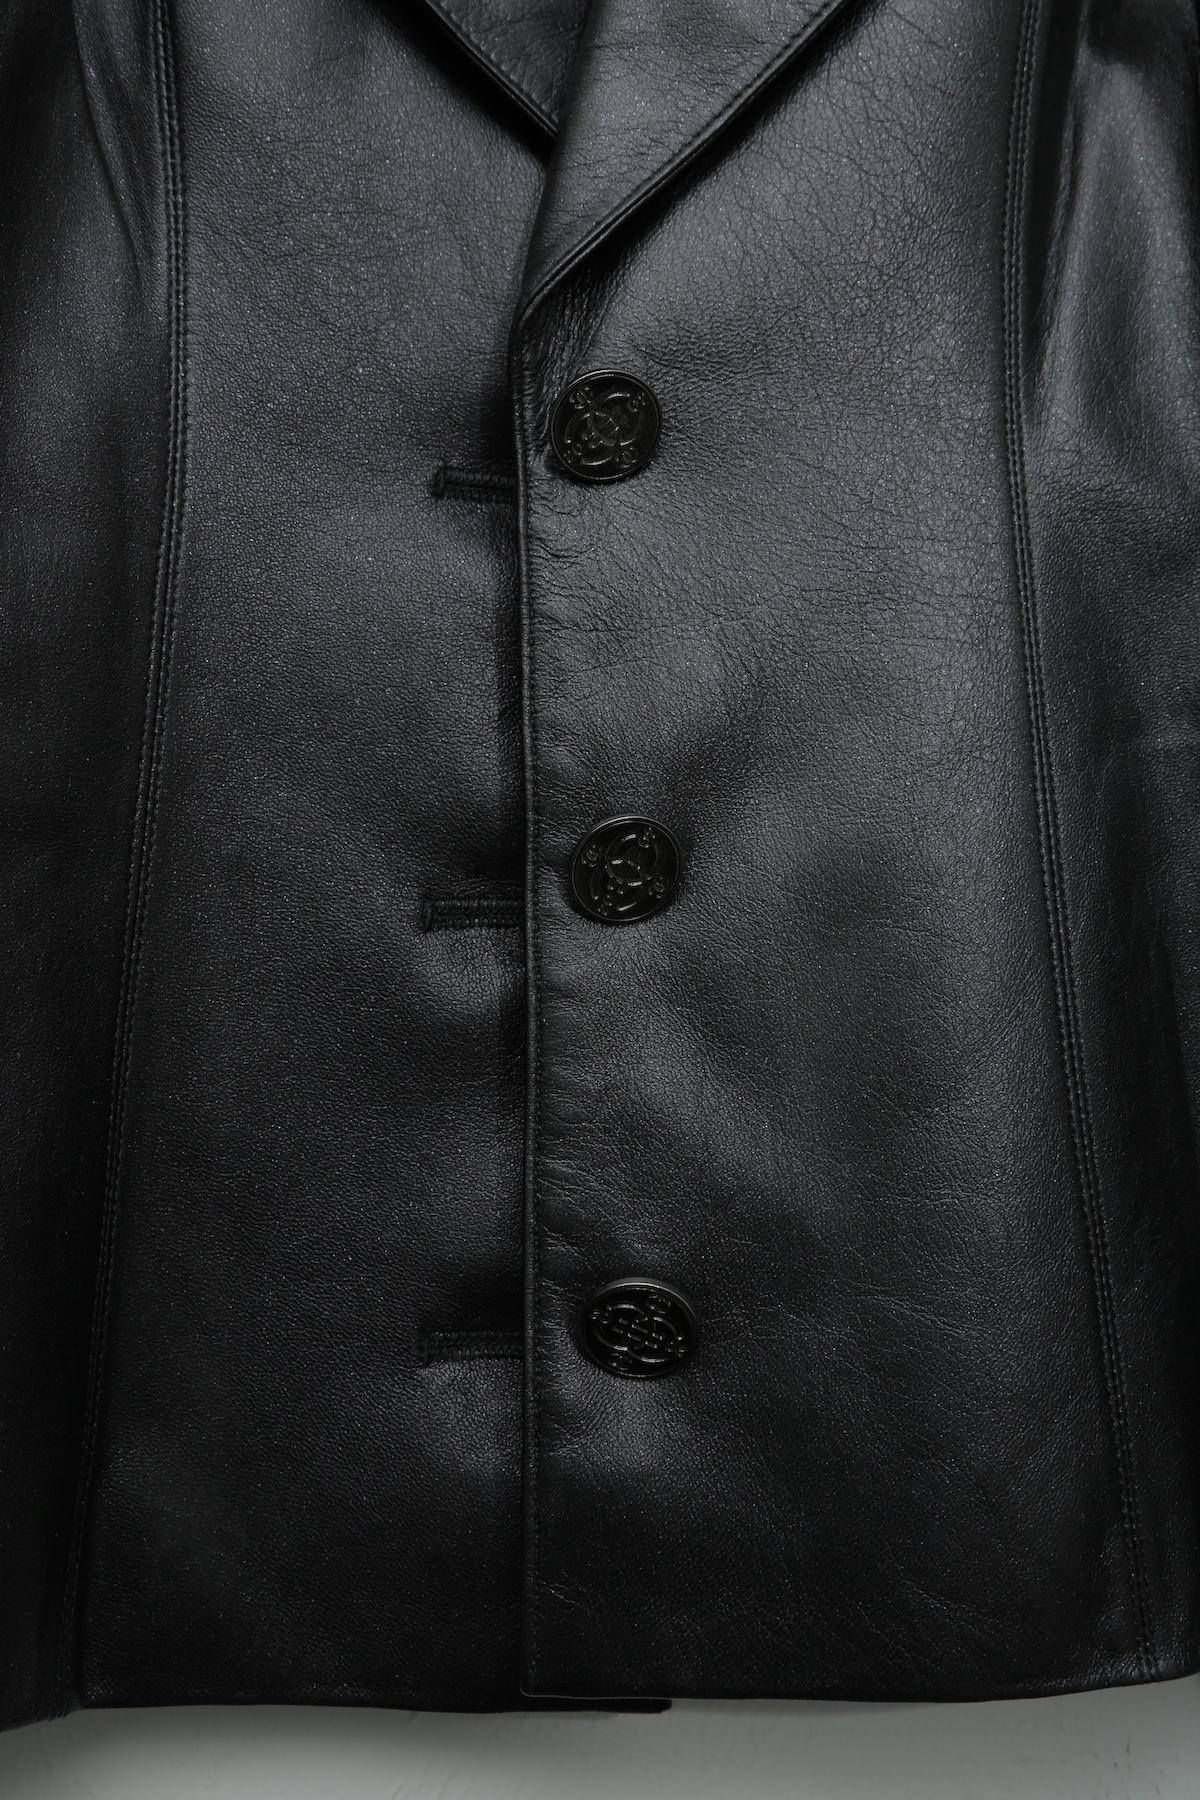 Chanel Black Metallic Fitted with Silver Logo Buttons Jacket In Excellent Condition For Sale In West palm beach, FL